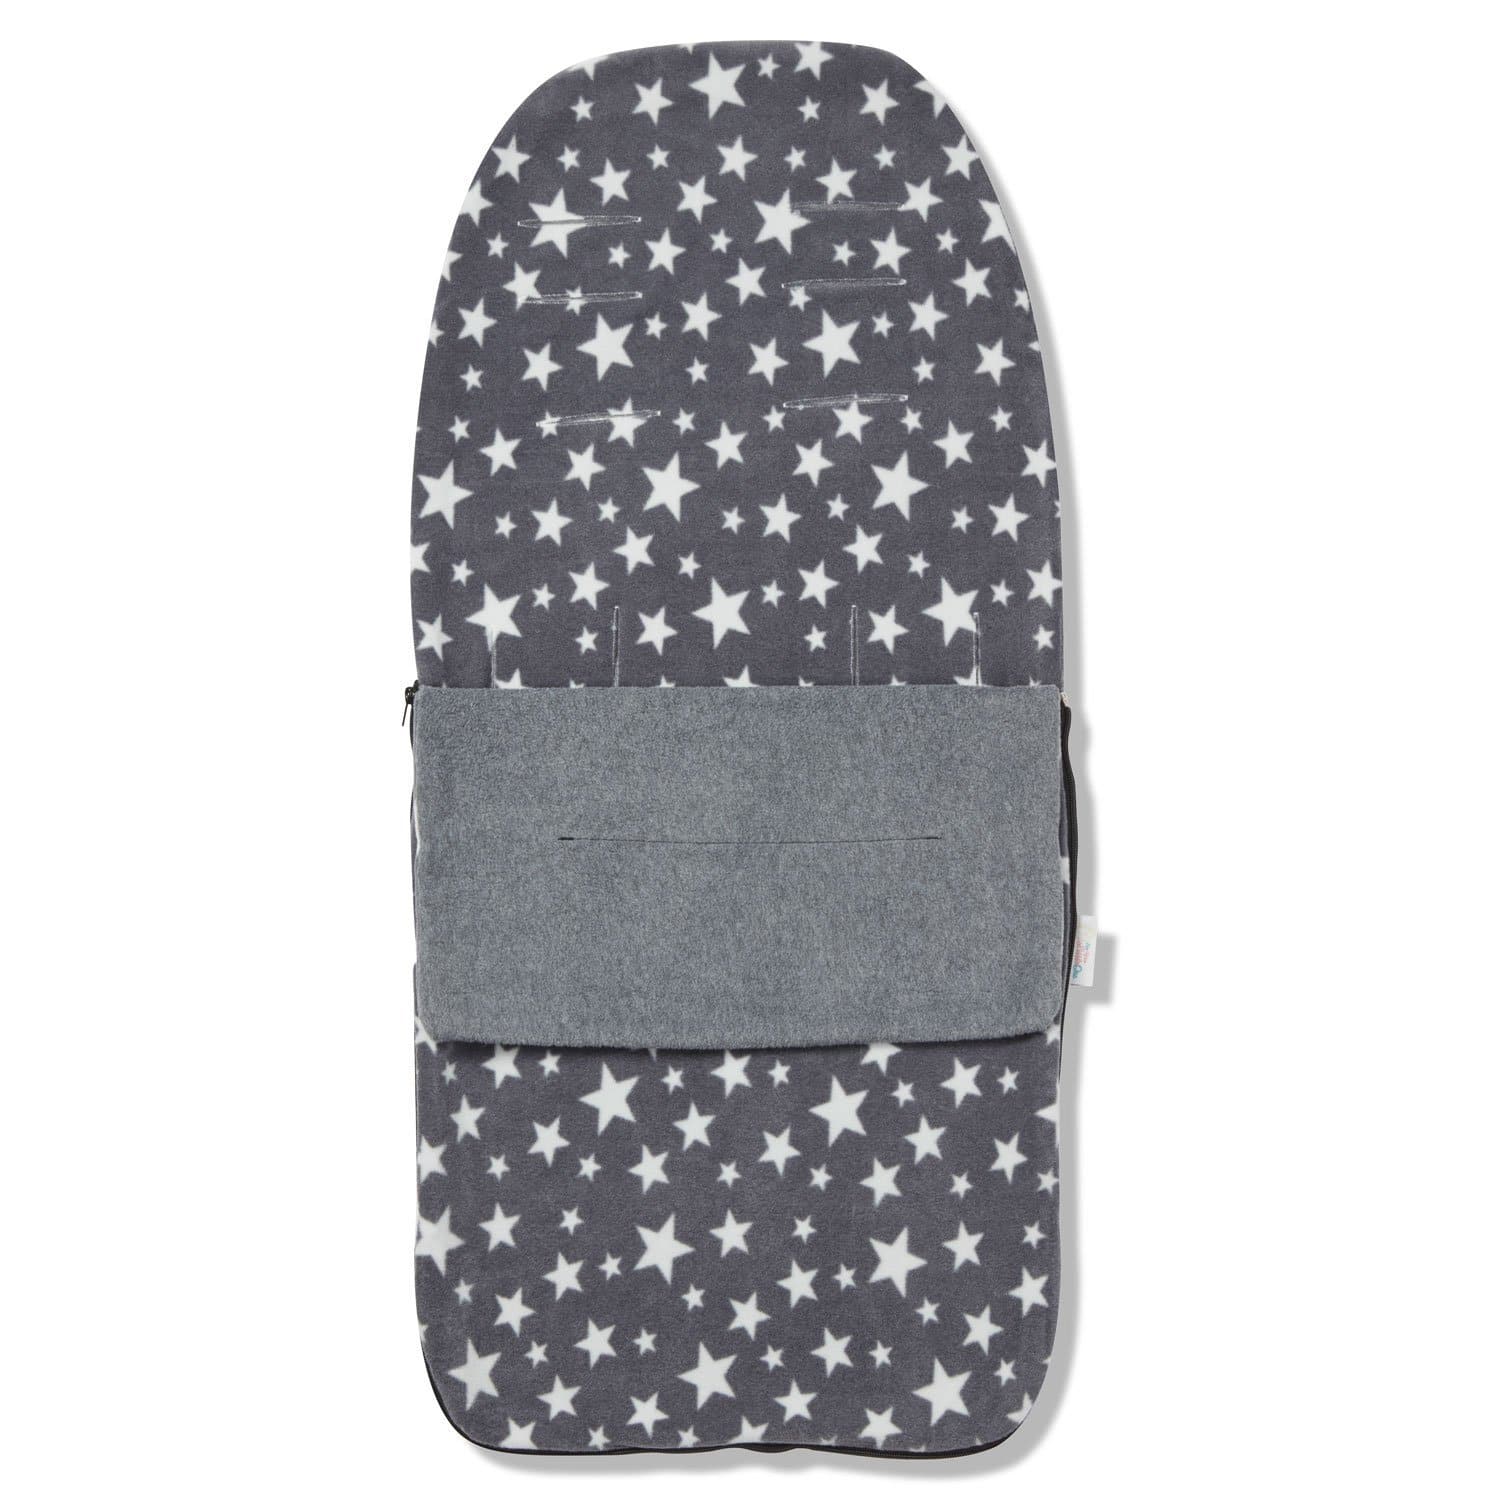 Snuggle Summer Footmuff Compatible with Babyzen - Grey Star / Fits All Models | For Your Little One